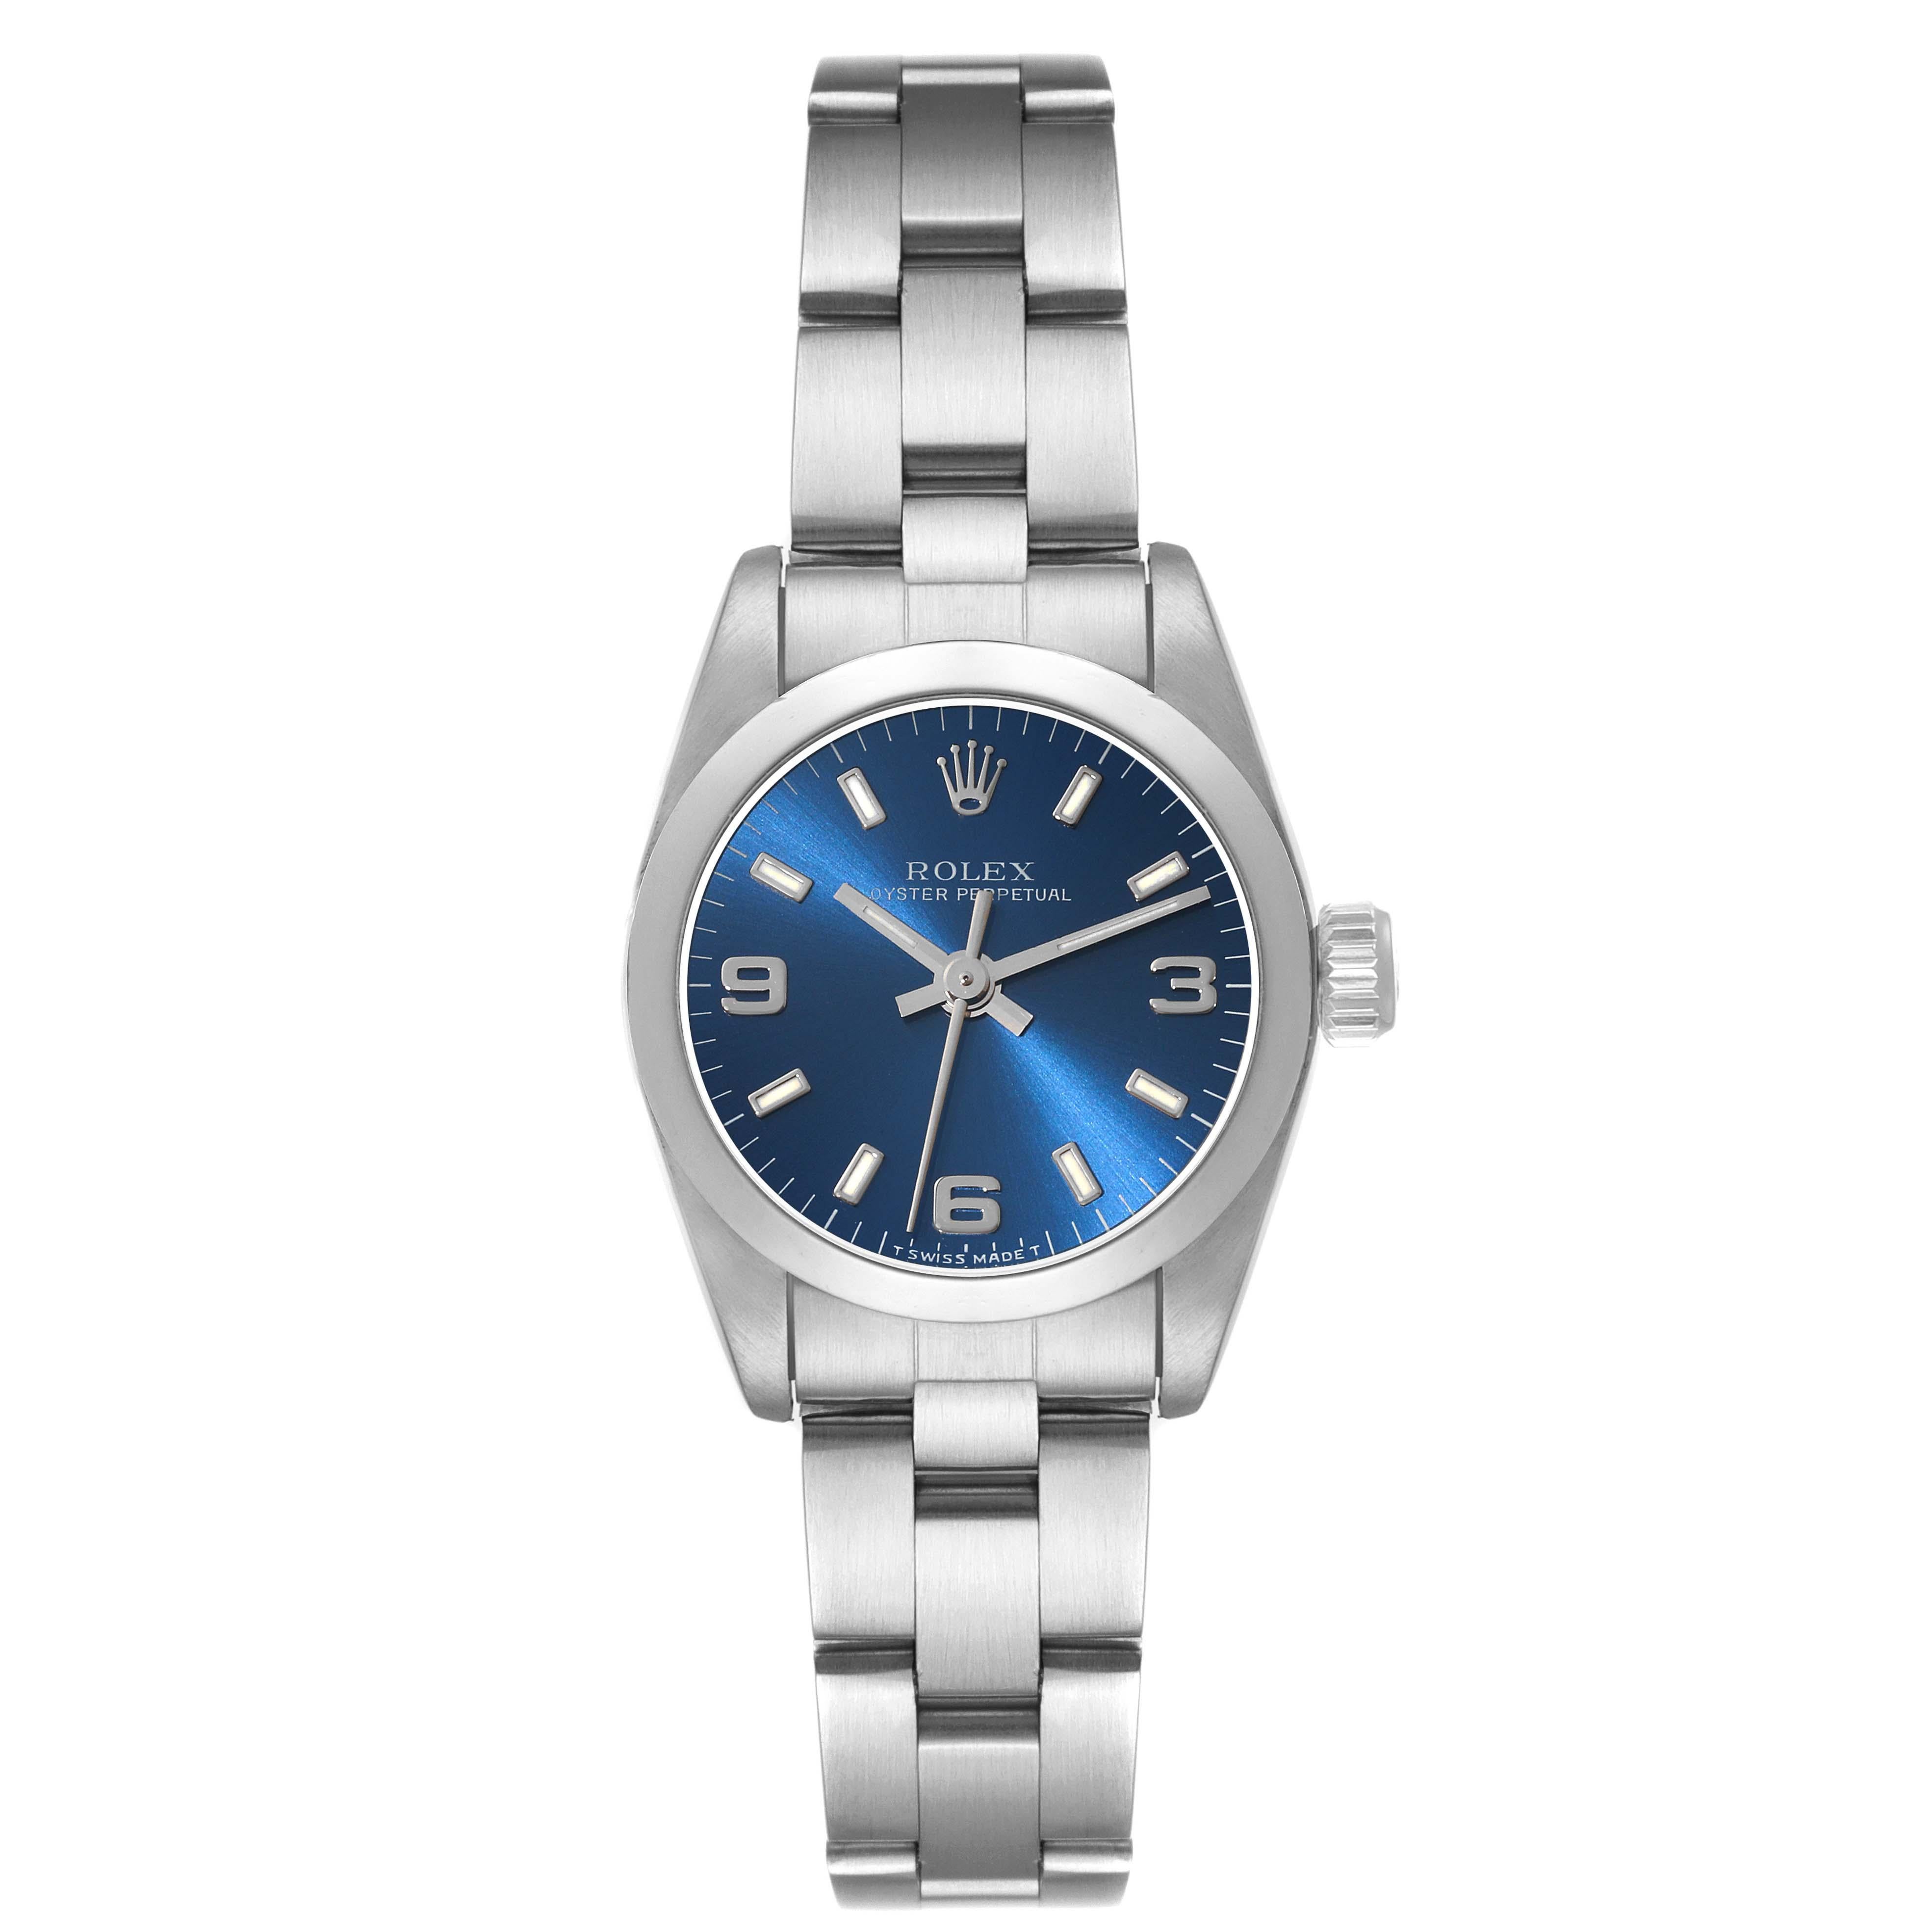 Rolex Oyster Perpetual Nondate Steel Blue Dial Ladies Watch 67180. Officially certified chronometer automatic self-winding movement. Stainless steel oyster case 24.0 mm in diameter. Rolex logo on a crown. Stainless steel smooth domed bezel. Scratch